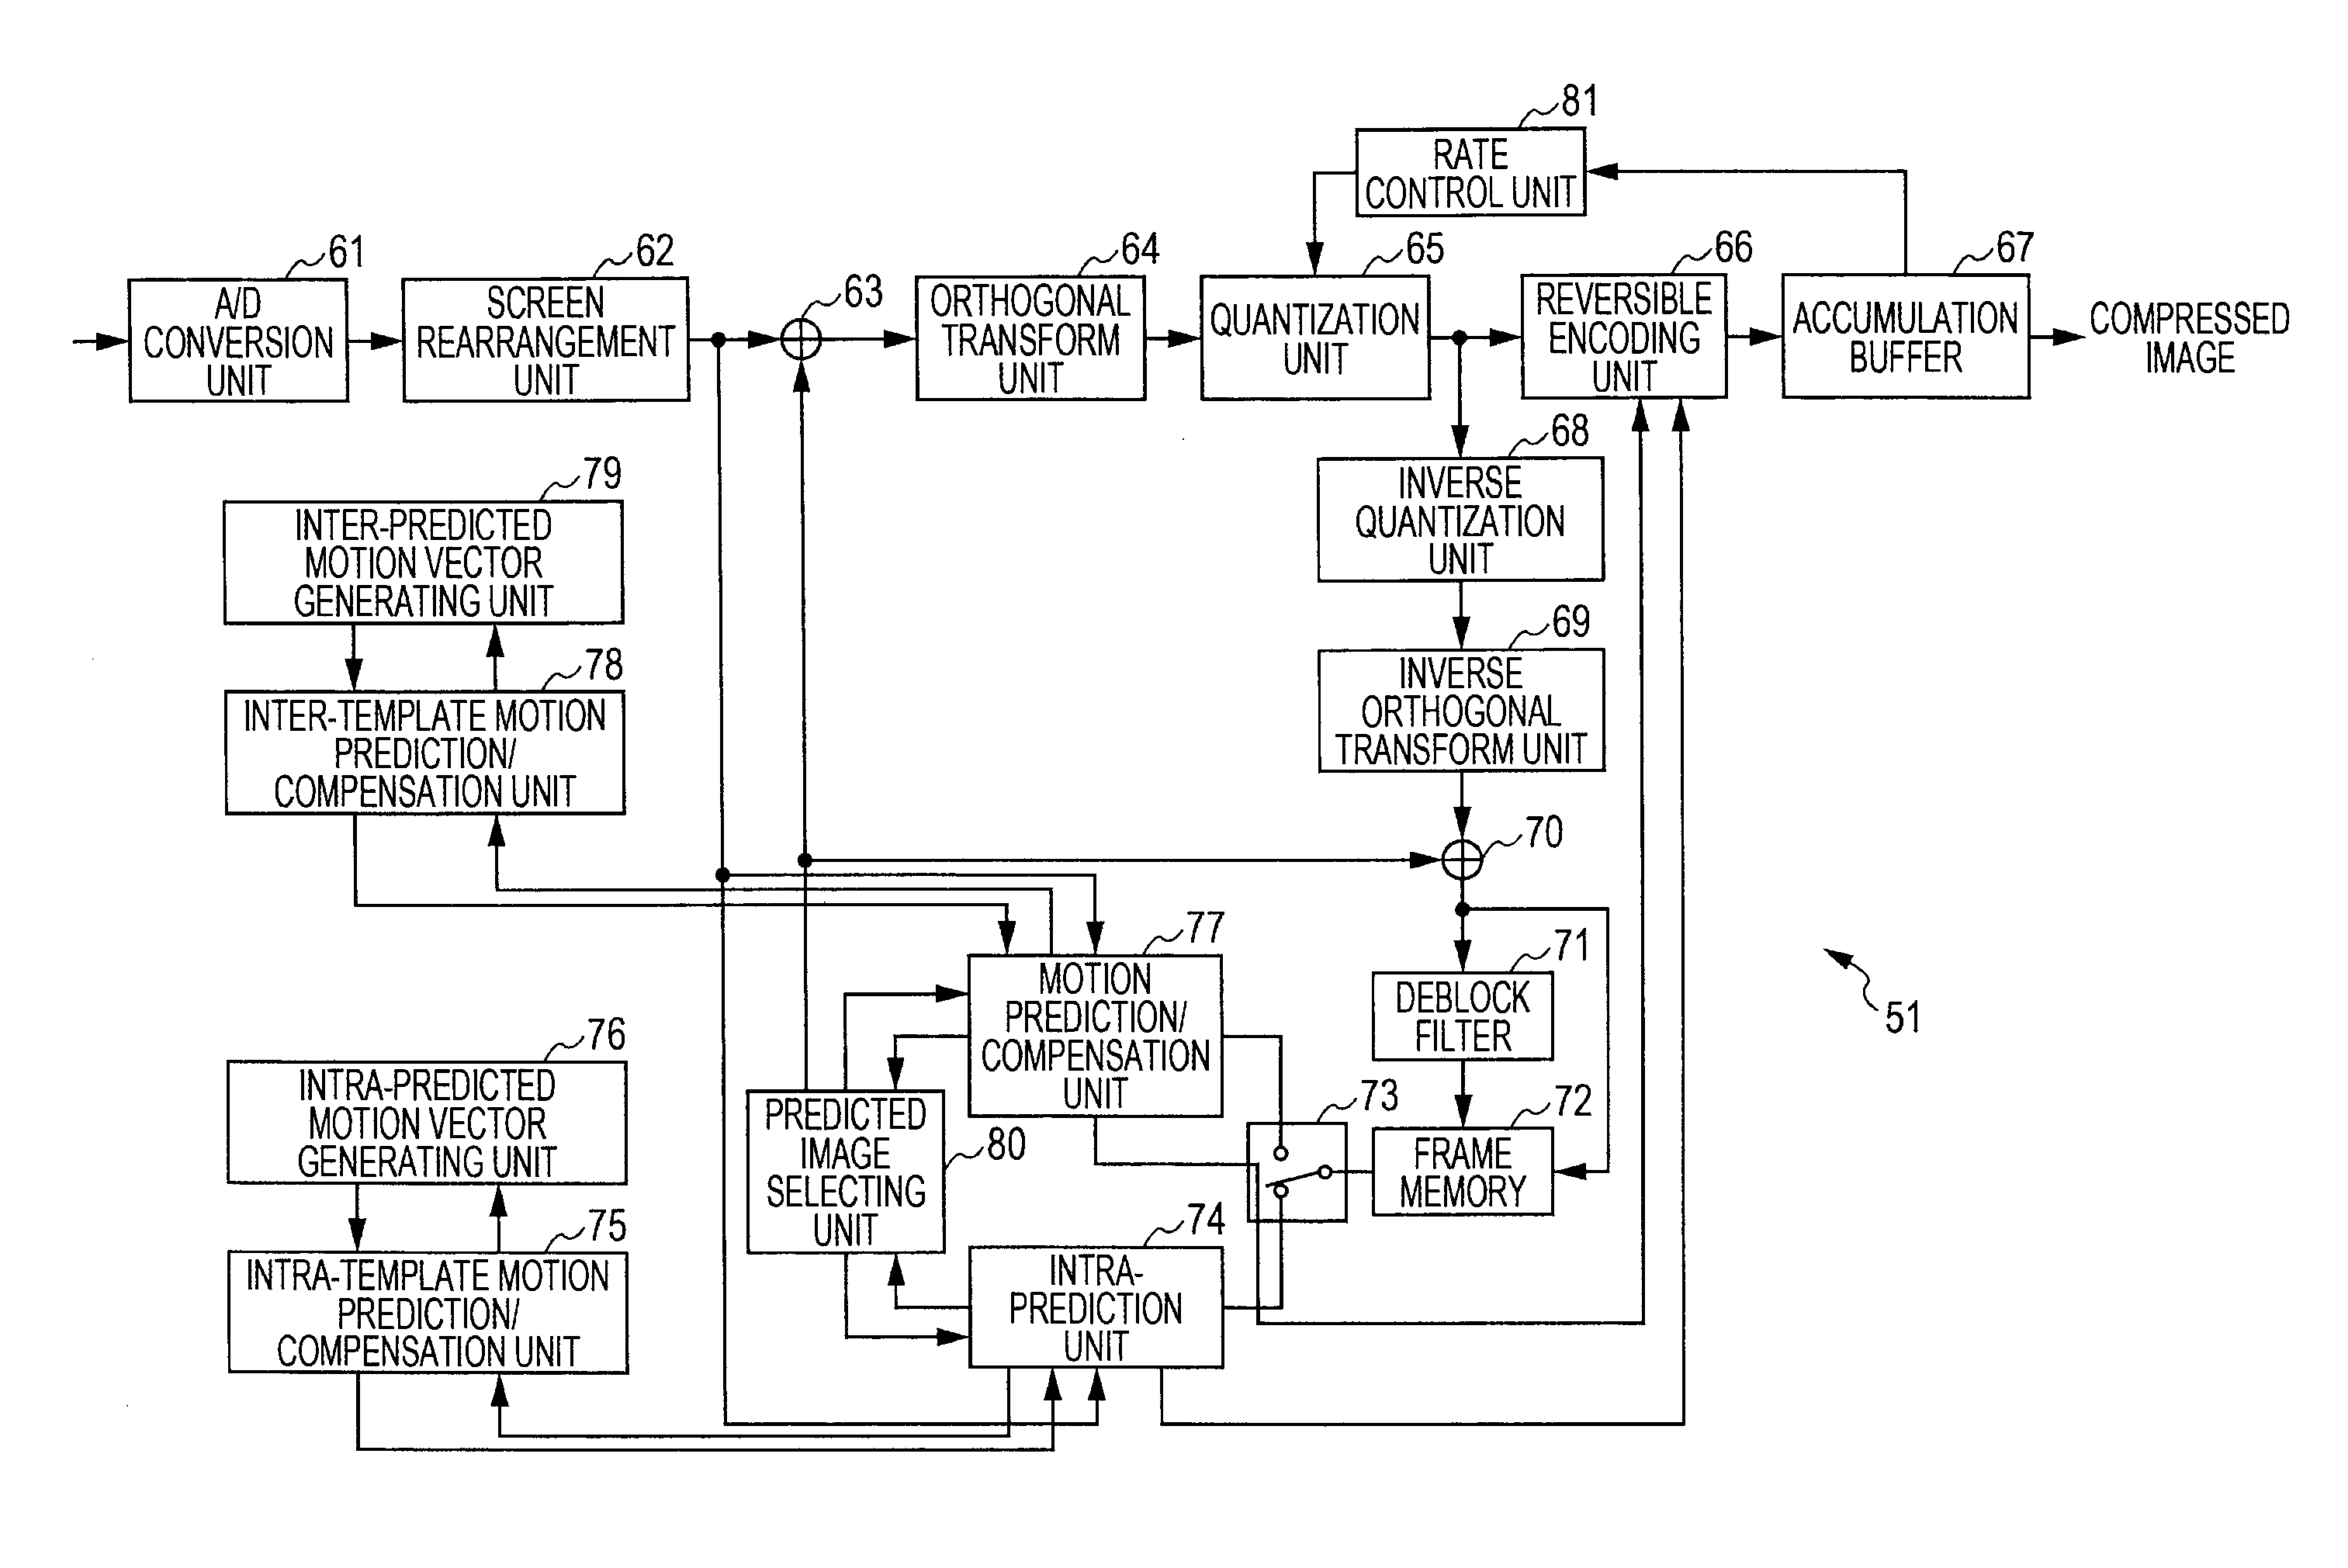 Image Processing Apparatus and Method